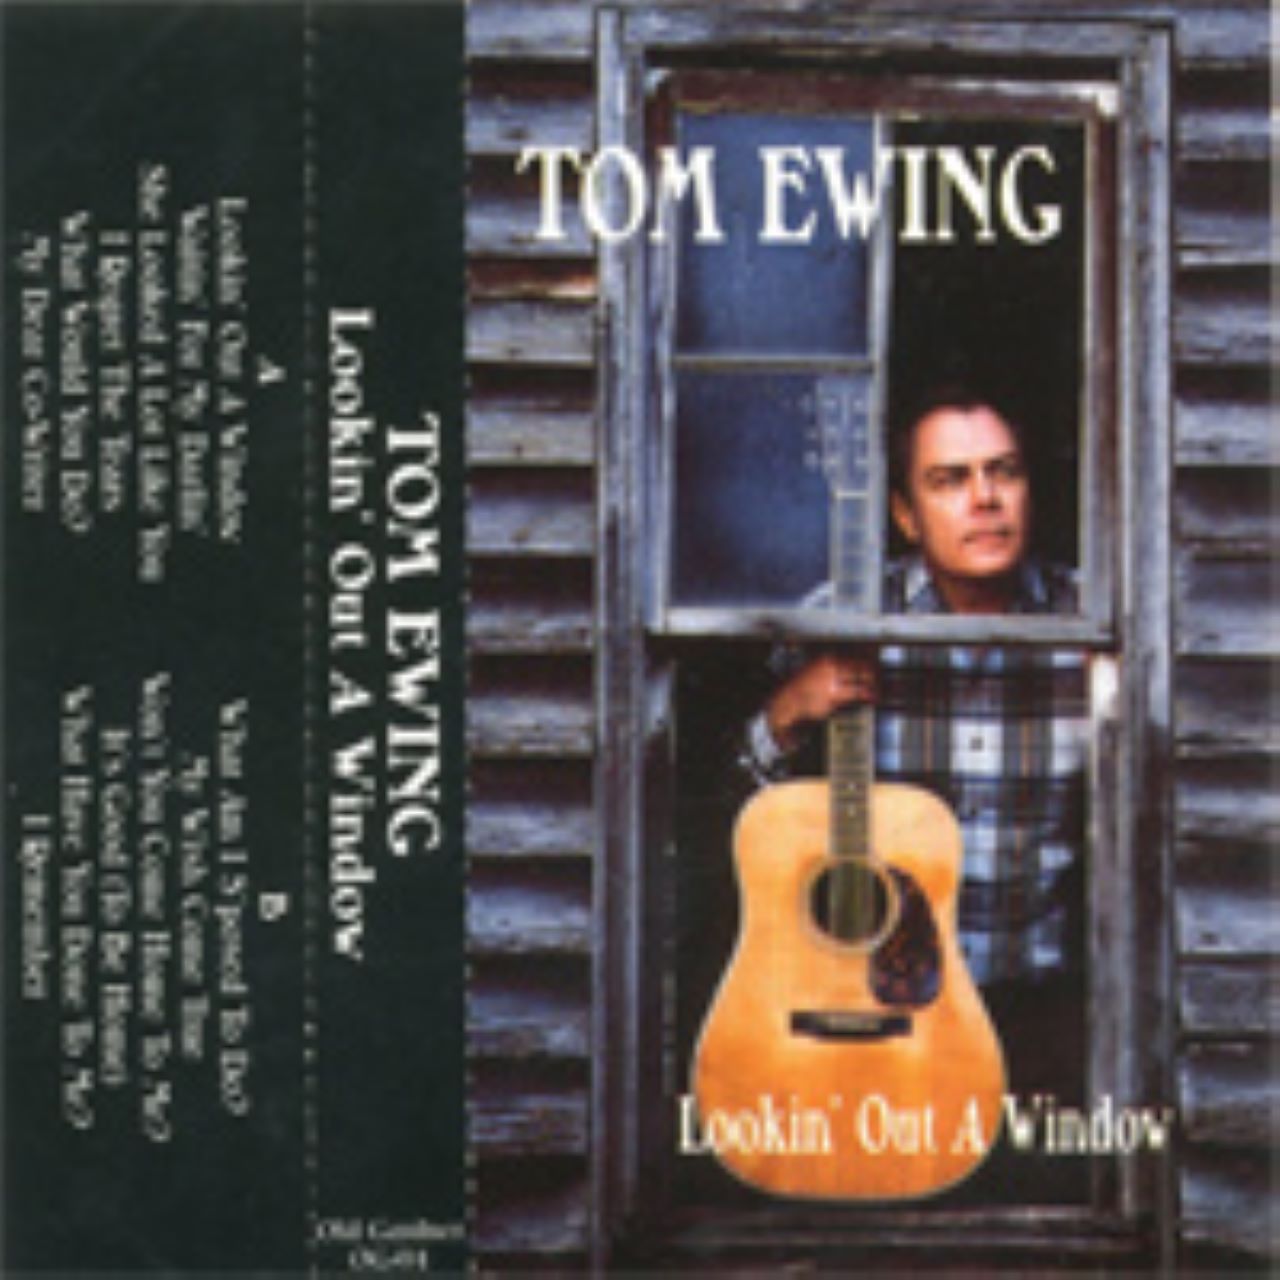 Tom Ewing - Lookin’ Out A Window cover album